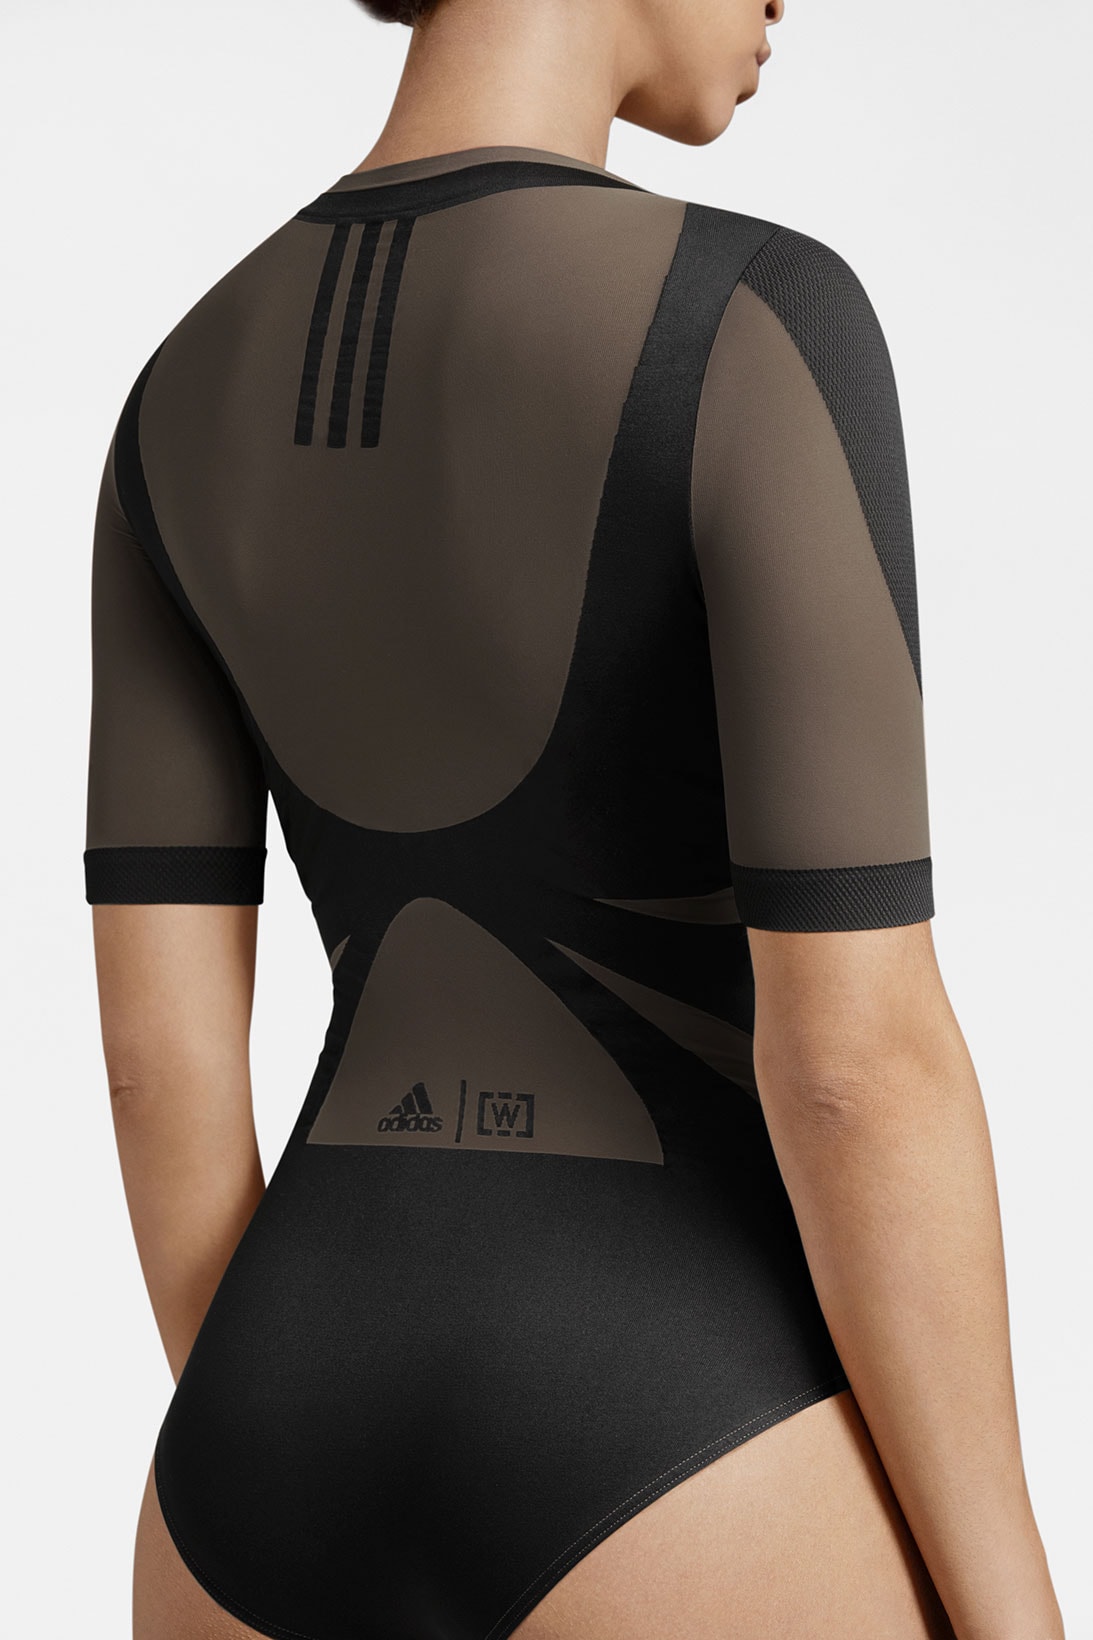 wolford adidas activewear performance collaboration seamless sheer motion black bodysuit back details